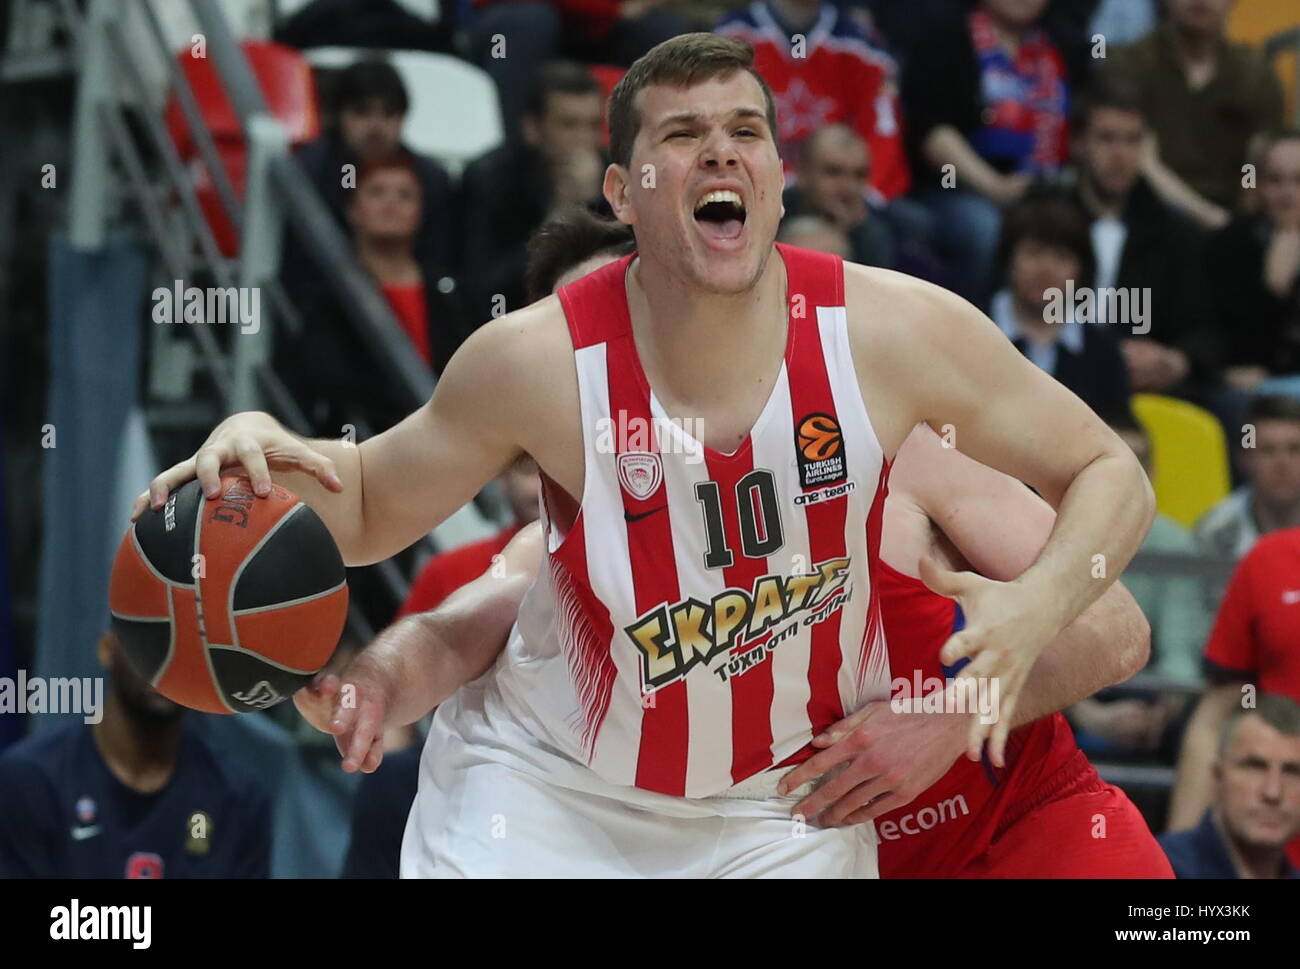 Olympiacos Piraeus High Resolution Stock Photography and Images - Alamy